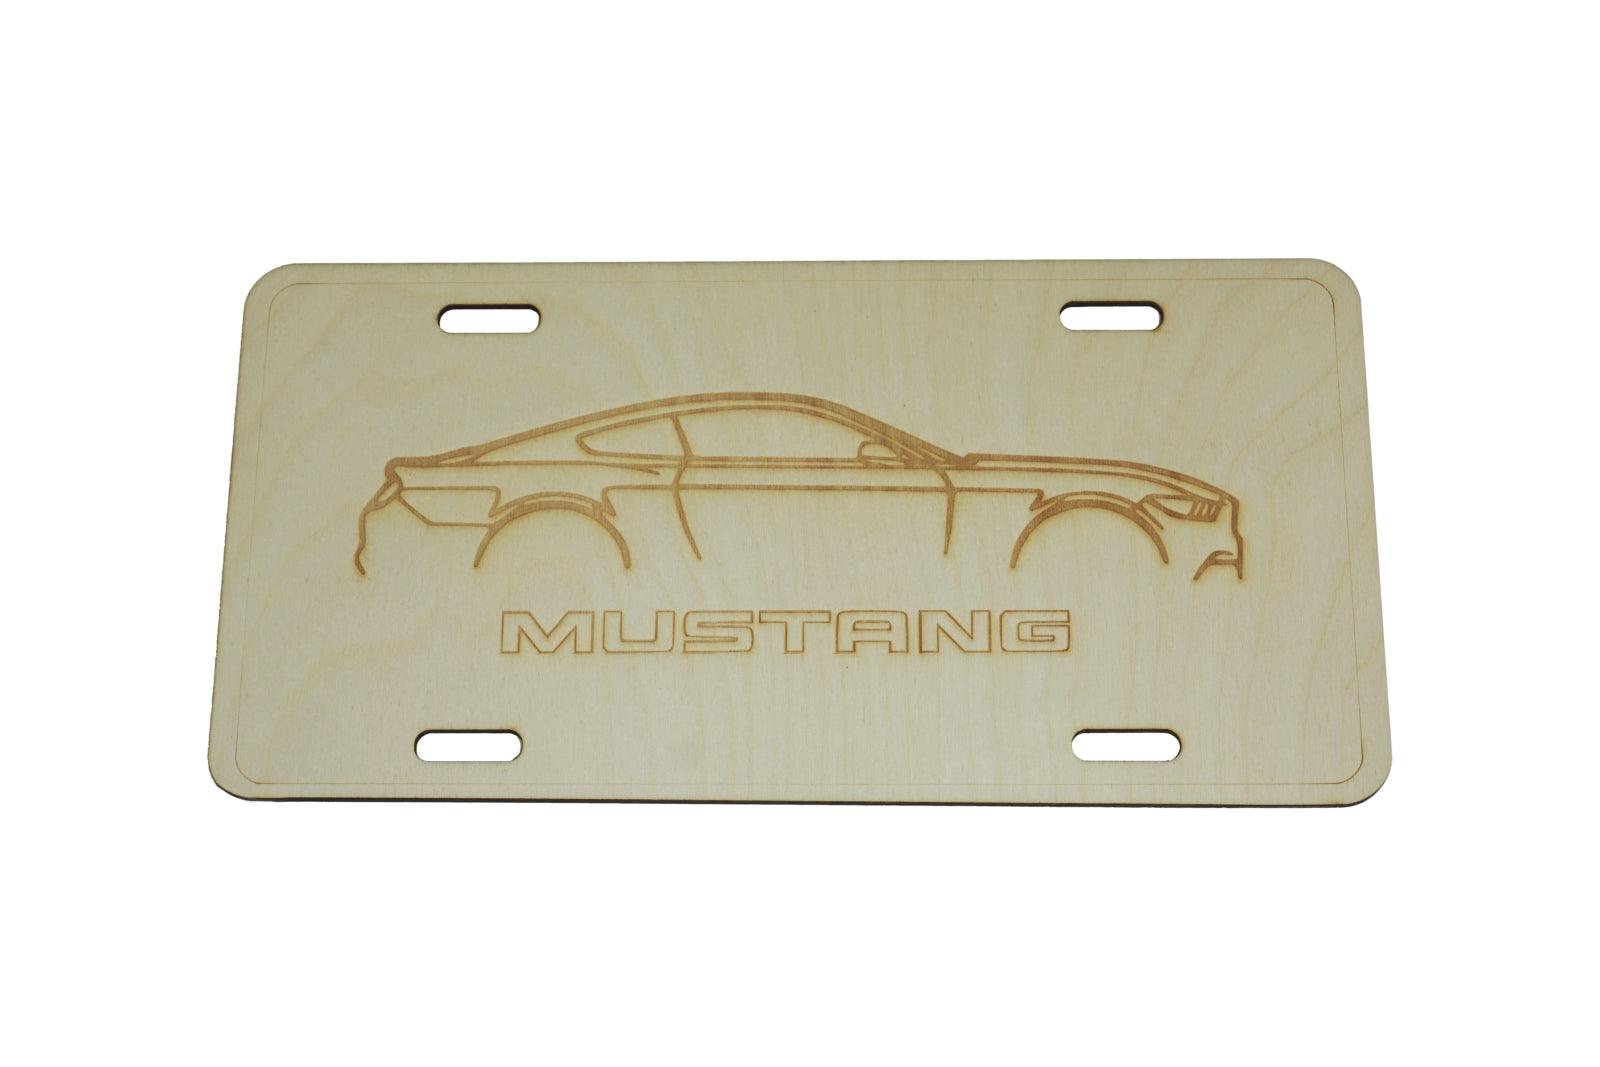 ZSPEC Ford Mustang S550 Cut-Away License Plate, Birch, Ornamental  1/8' Birch Plywood construction.  Approximately the same size as a traditional license plate ZSPEC Design LLC Chevy Monte Carlo SS